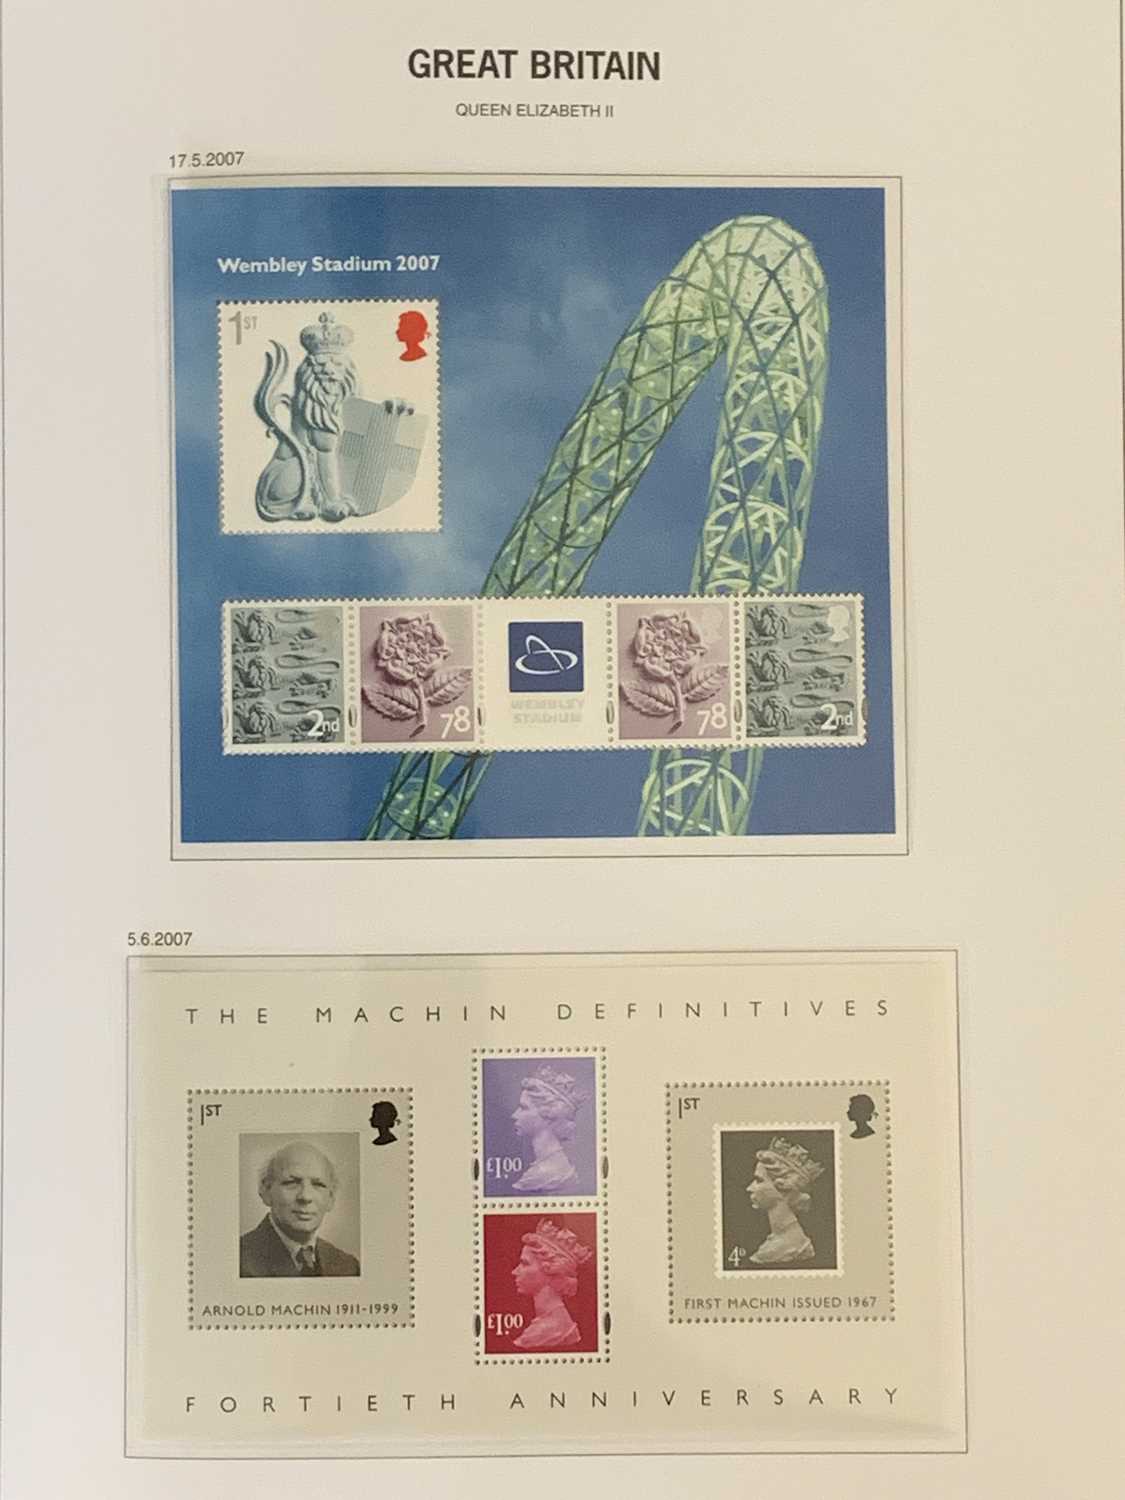 STAMPS - STANLEY GIBBONS ALBUM WITH SLIP - GB mint commemoratives 2000-2007, appears complete - Image 7 of 15